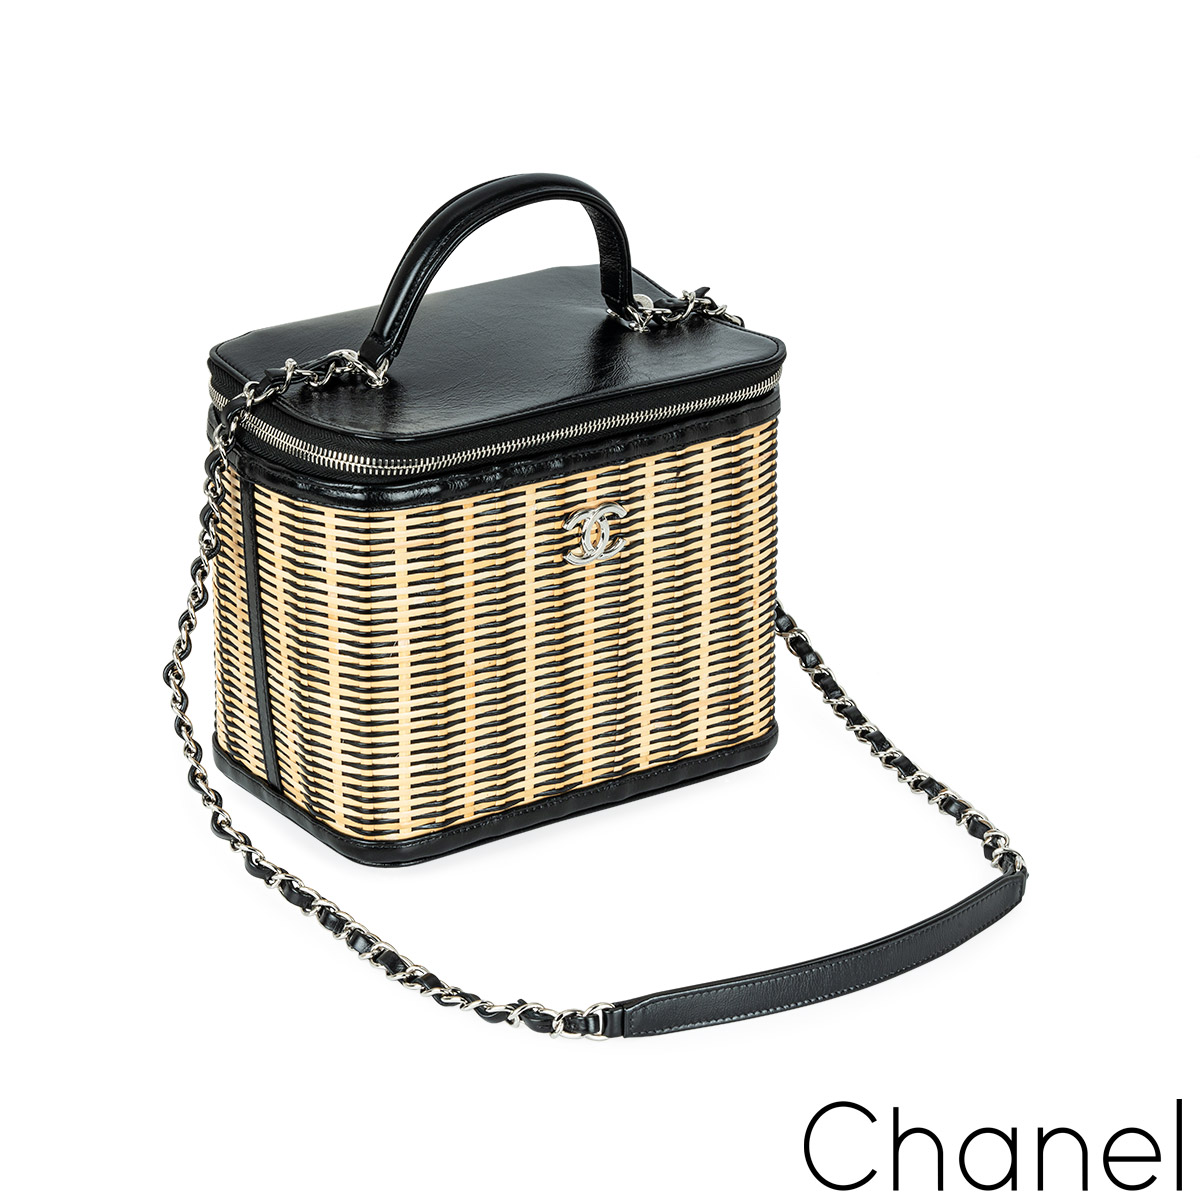 Chanel Filigree Vanity Gold and Tan Wicker with Gold Hardware Preowned in  Box WA001  Julia Rose Boston  Shop